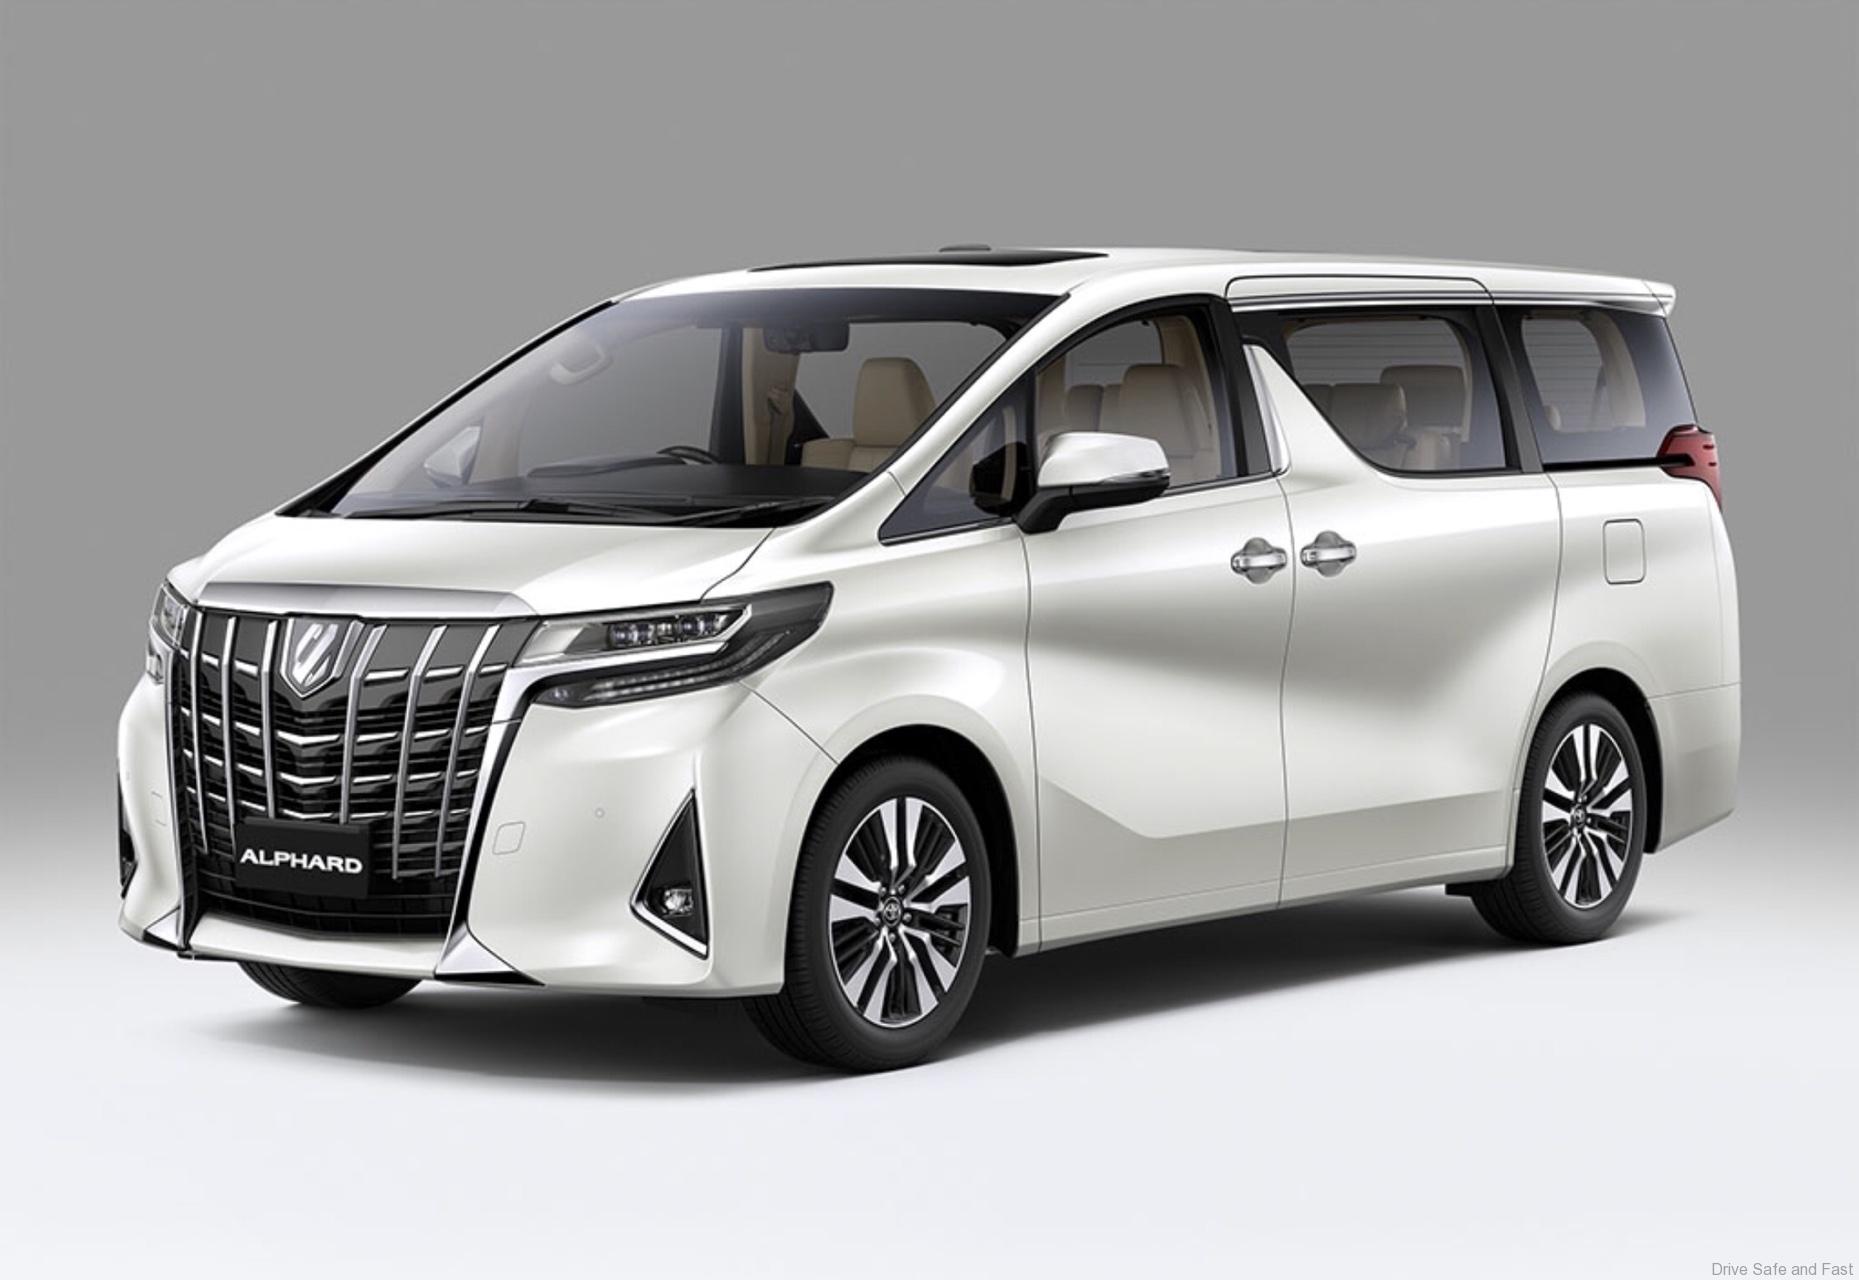 Alphard and Vellfire Updated for 2018, In UMW Toyota Showrooms Now